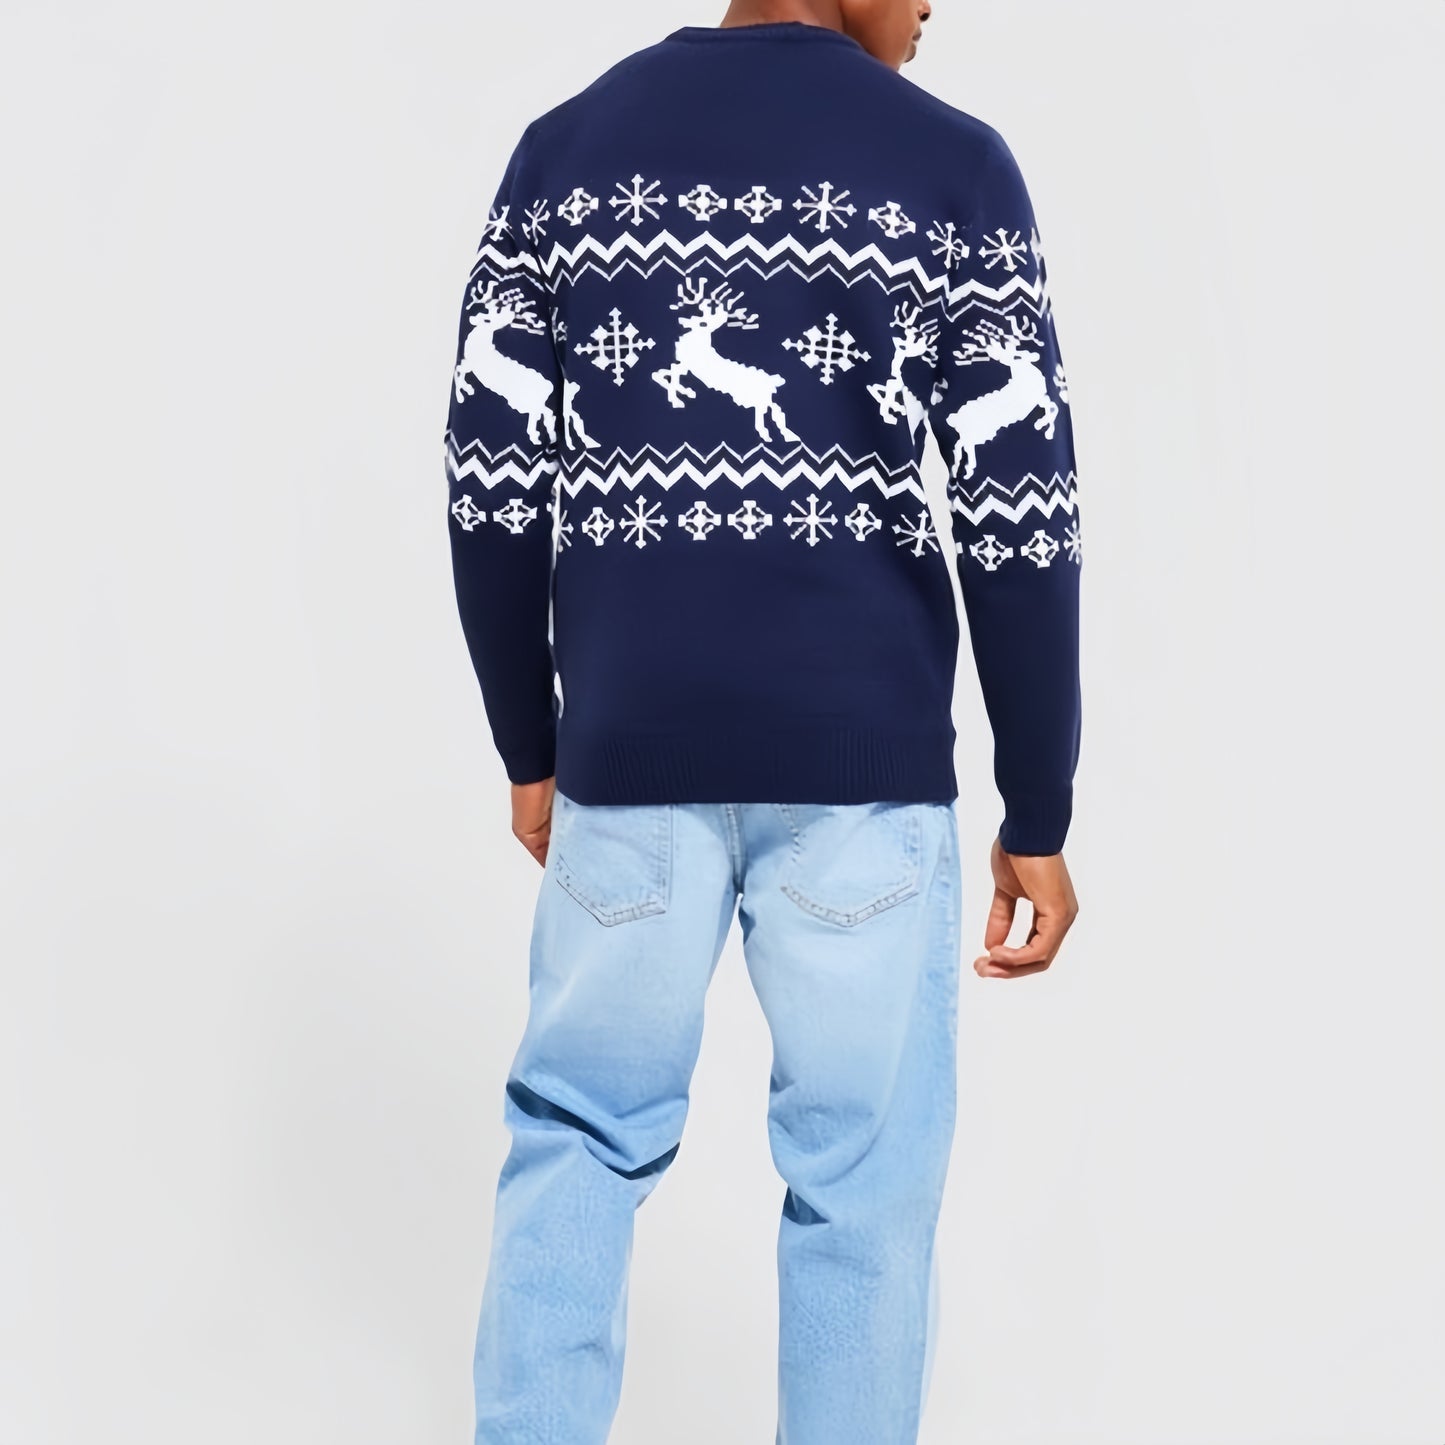 "Back view of a custom cashmere Christmas sweater featuring a navy reindeer Fair Isle pattern. The model is wearing light blue jeans, highlighting the sweater's design and fit, perfect for festive and winter occasions."